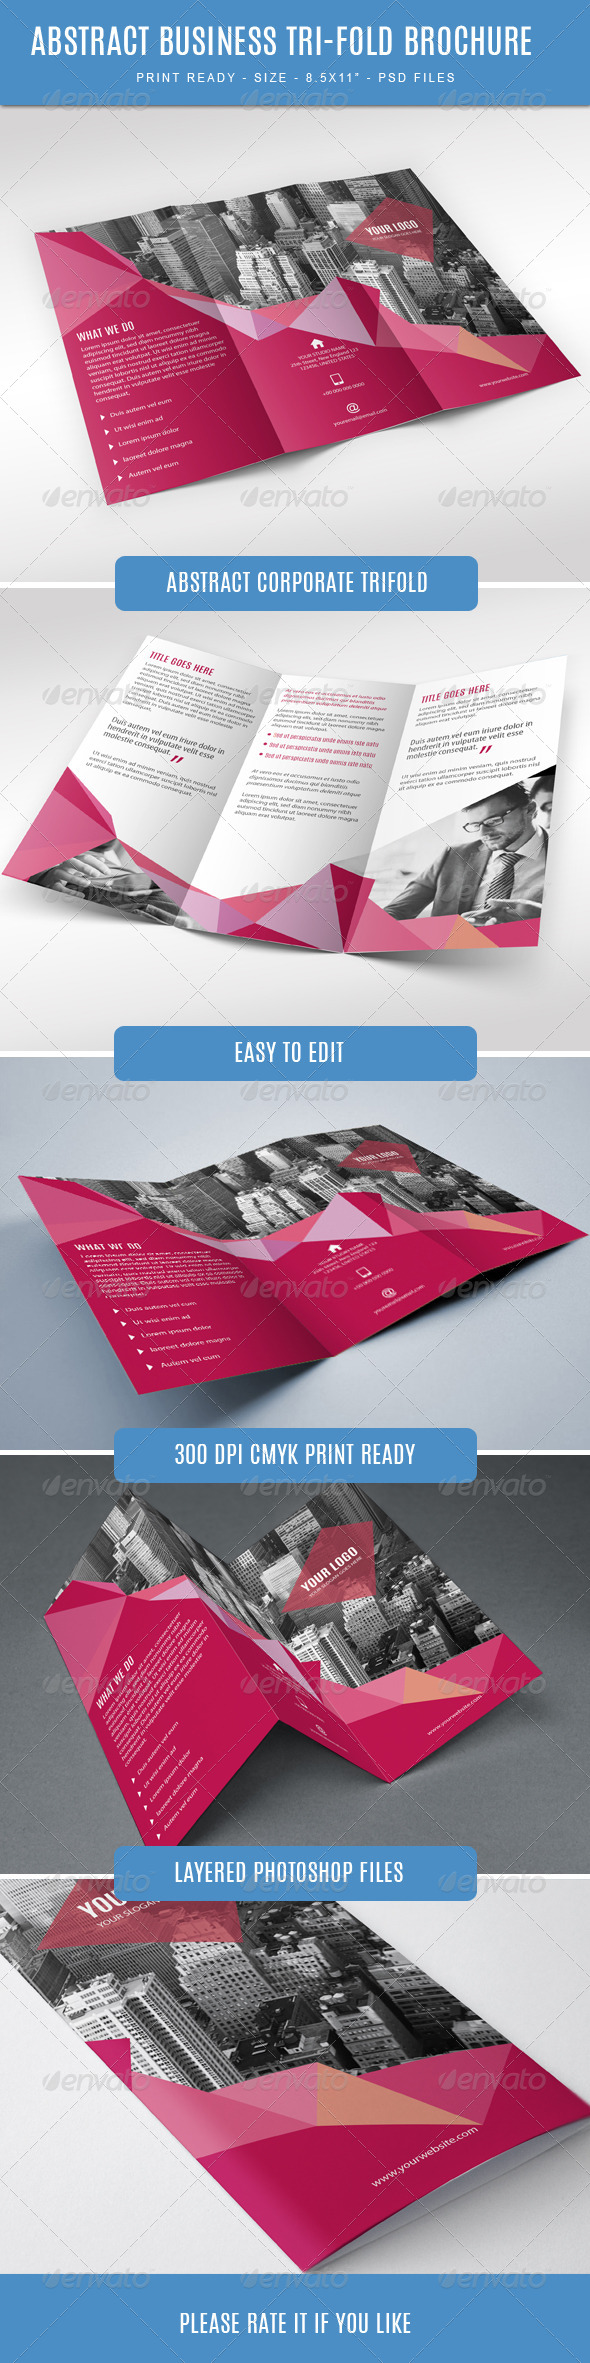 GraphicRiver Abstract Trifold Brochure for Business 7662582